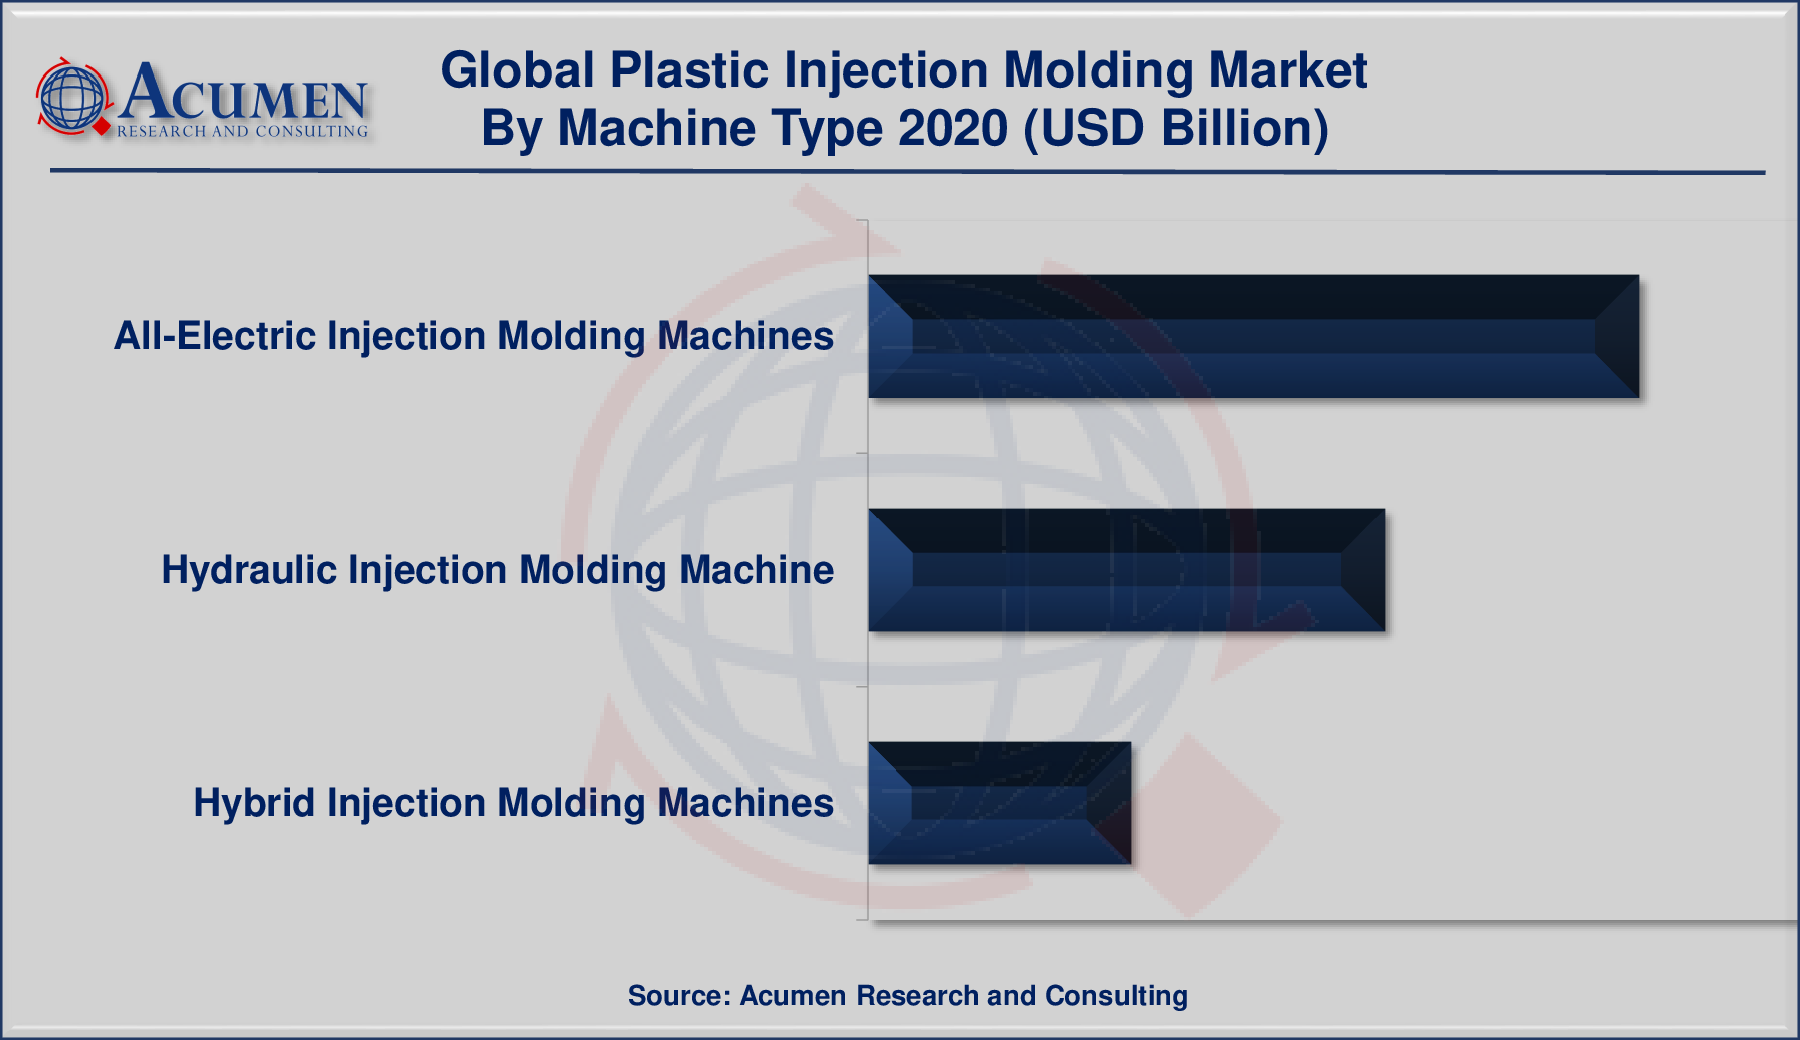 Plastic Injection Molding Market Share was valued at USD 260.30 Billion in 2020 and is predicted to be worth USD 377.41 Billion by 2028, with a CAGR of 4.8% from 2021 to 2028.